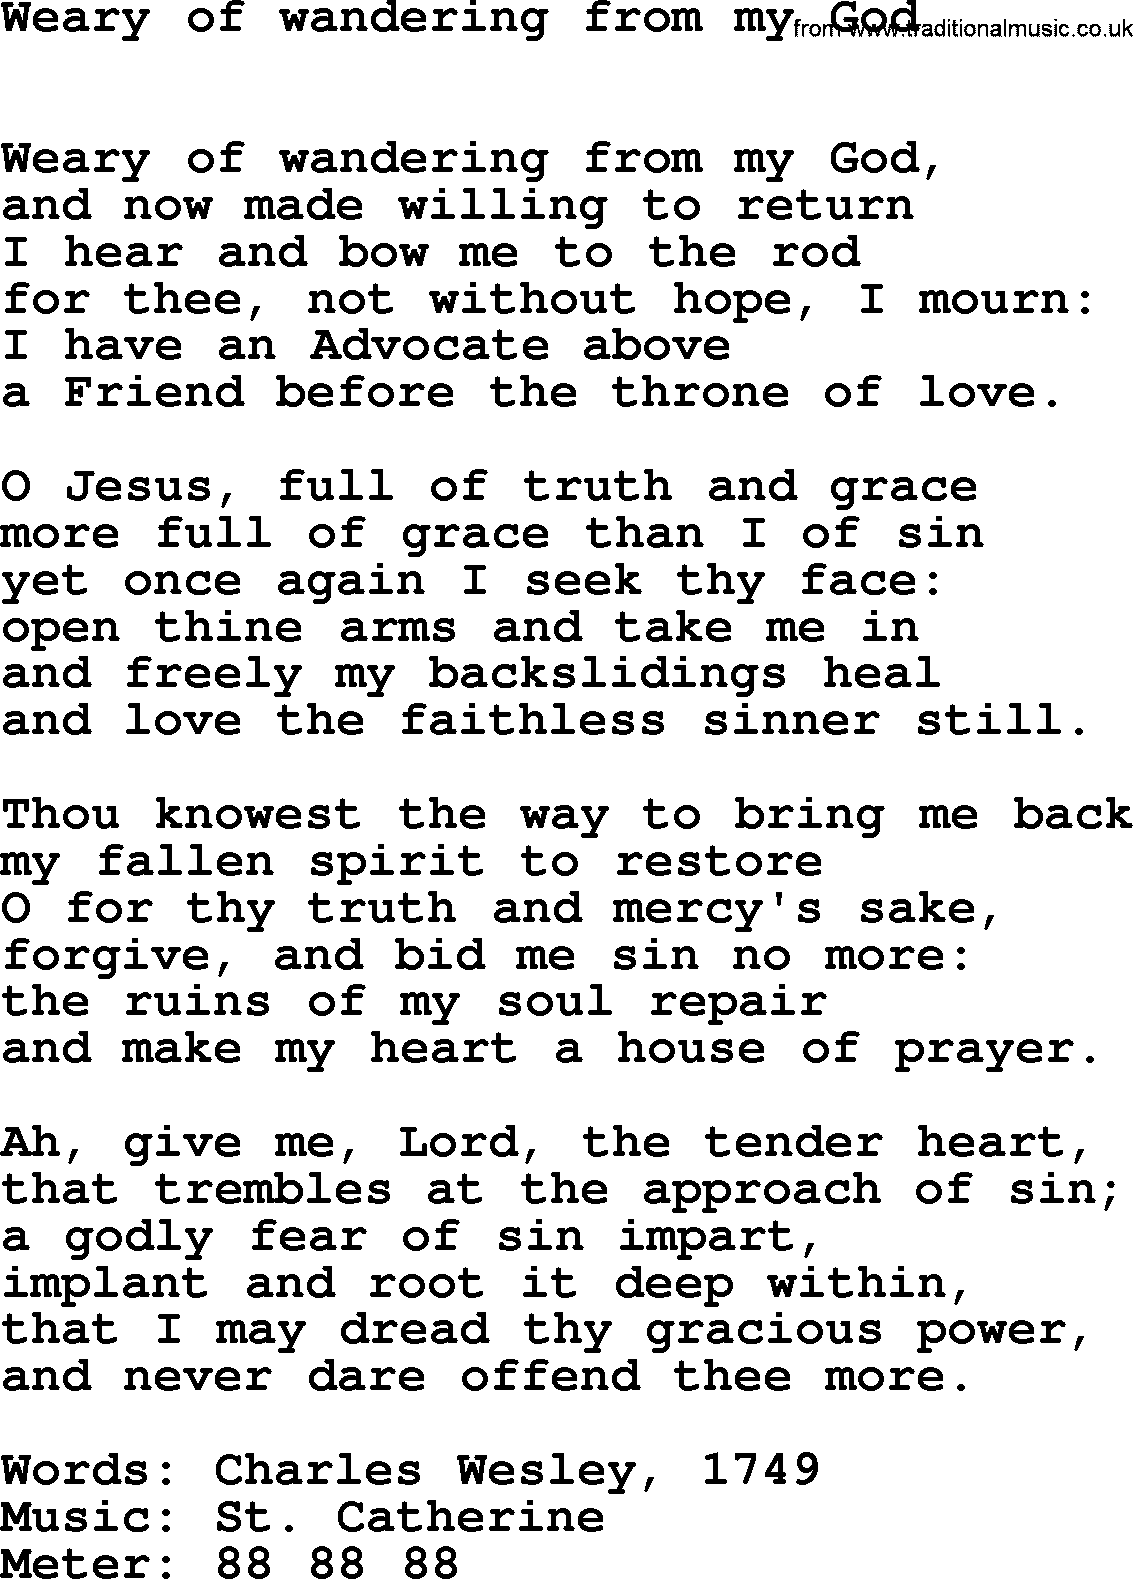 Book of Common Praise Hymn: Weary Of Wandering From My God.txt lyrics with midi music